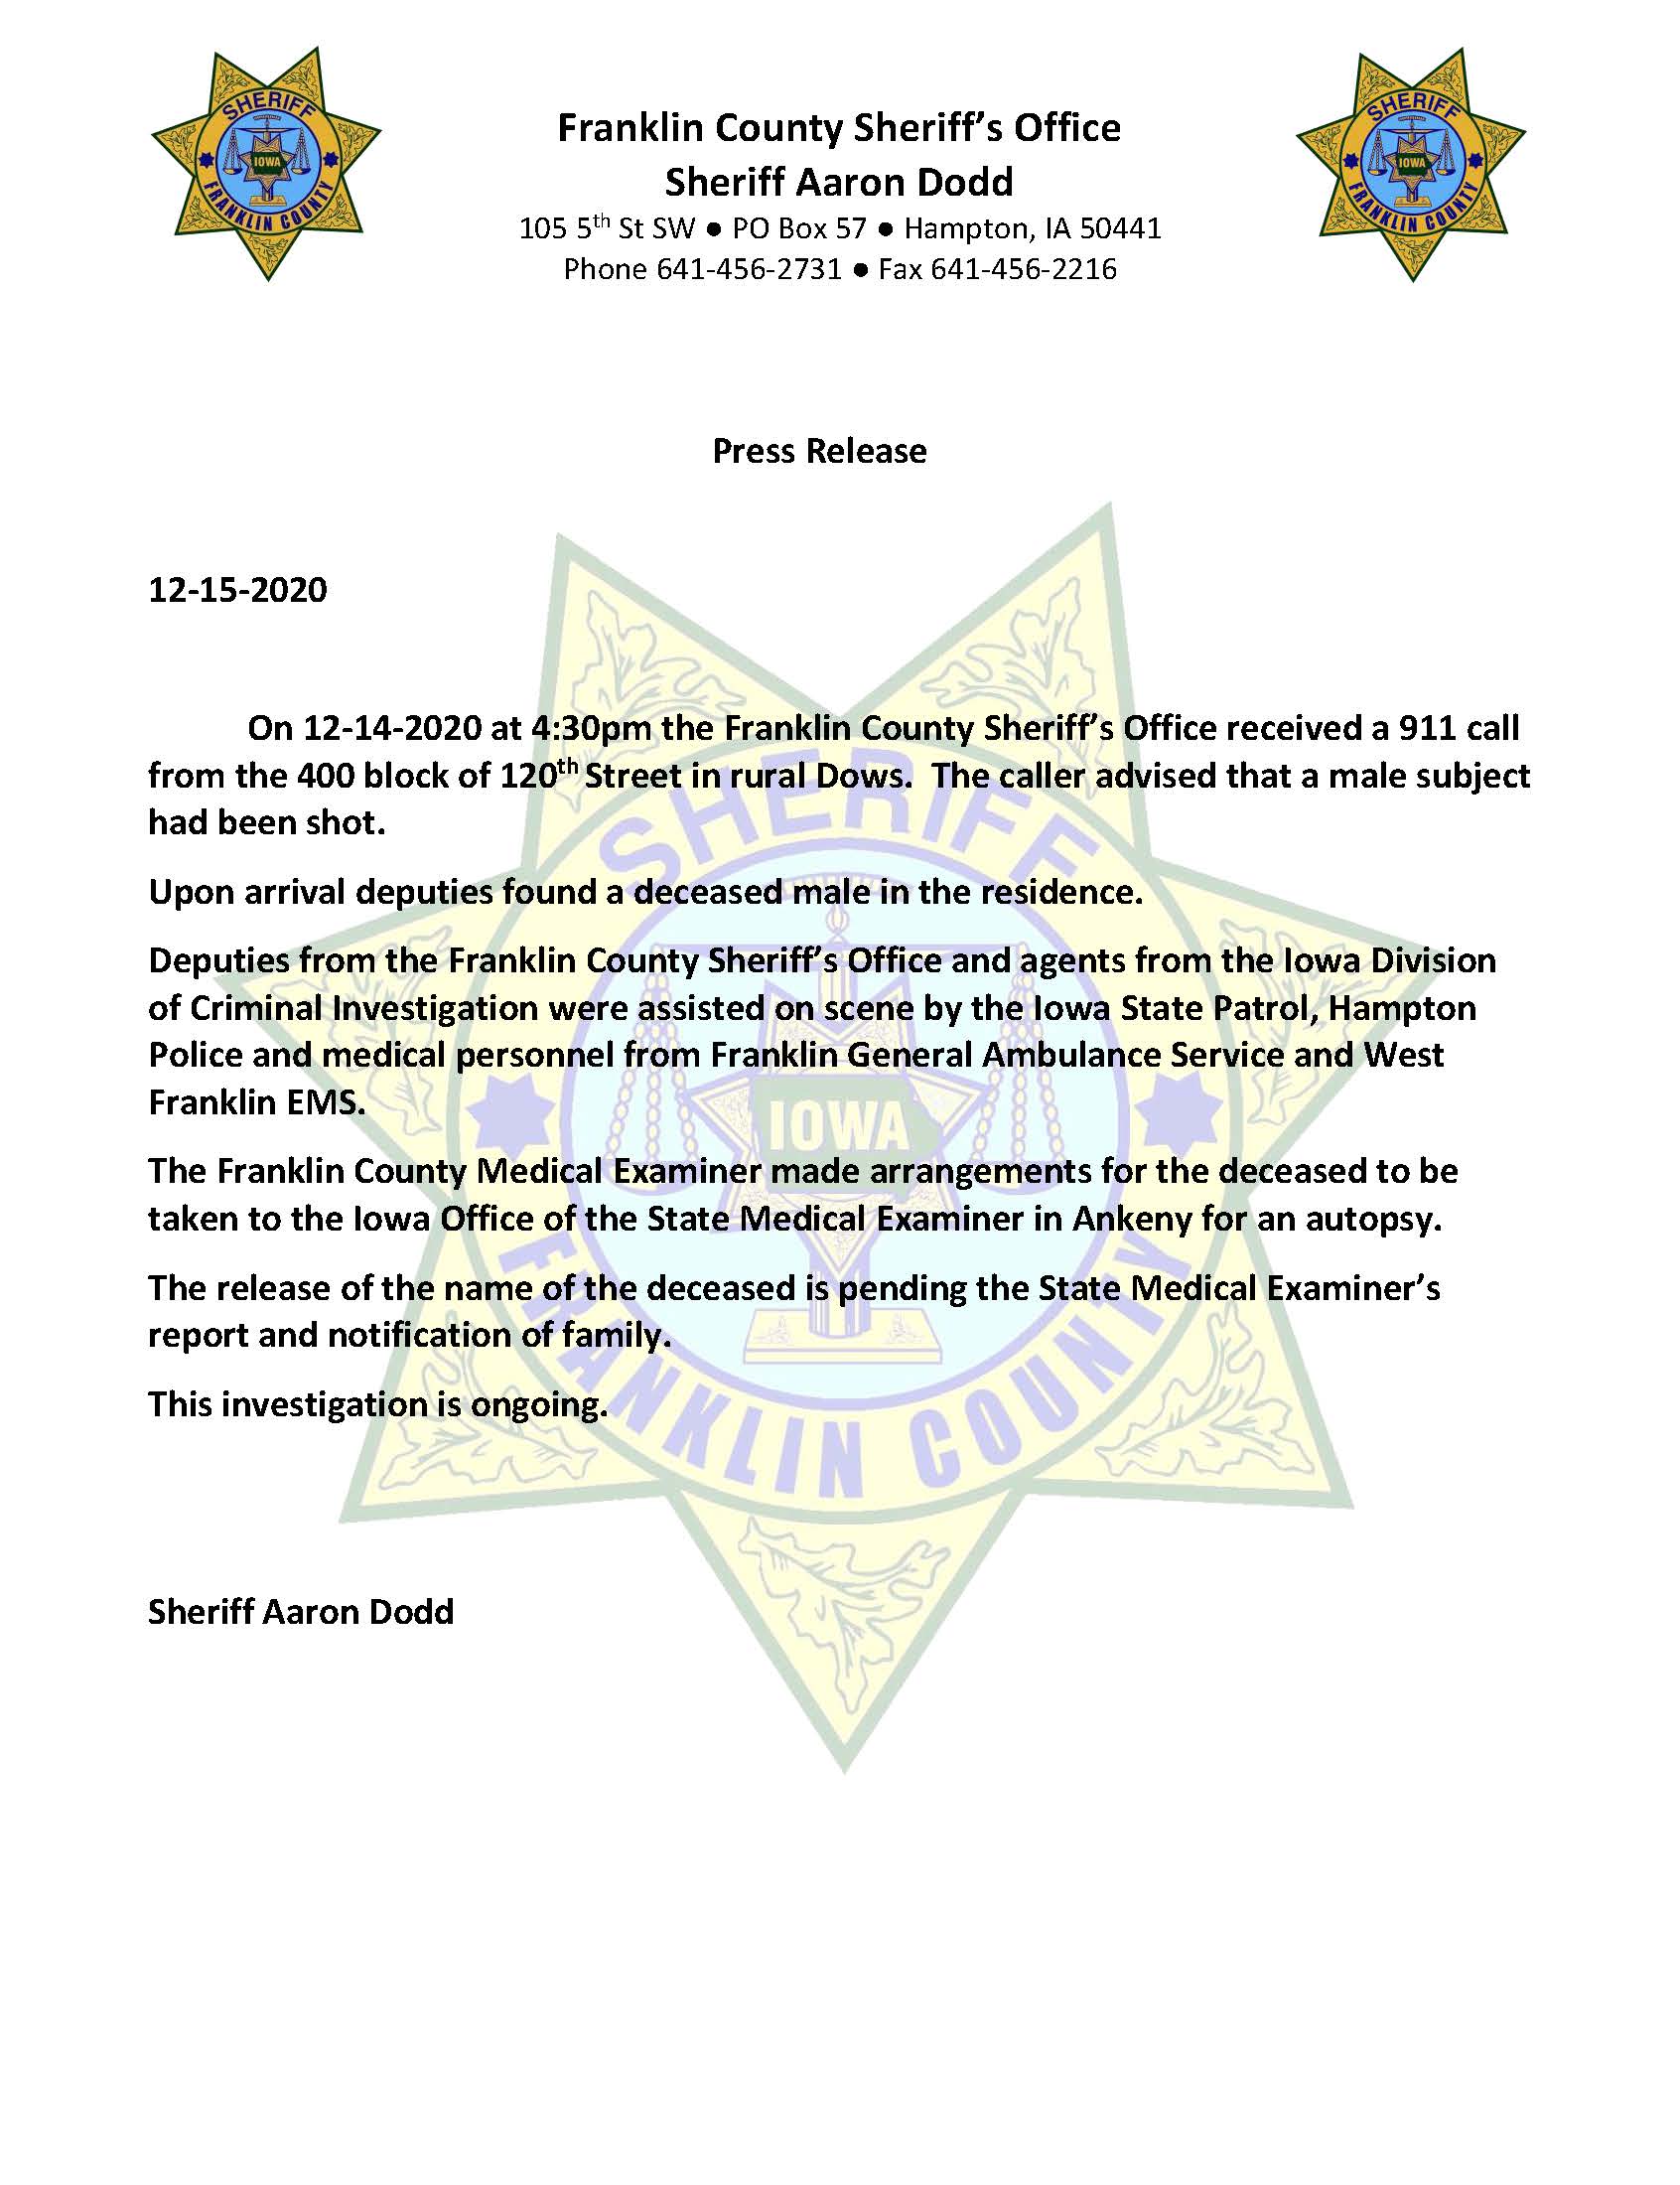 LInk to Franklin County Sheriff's Office